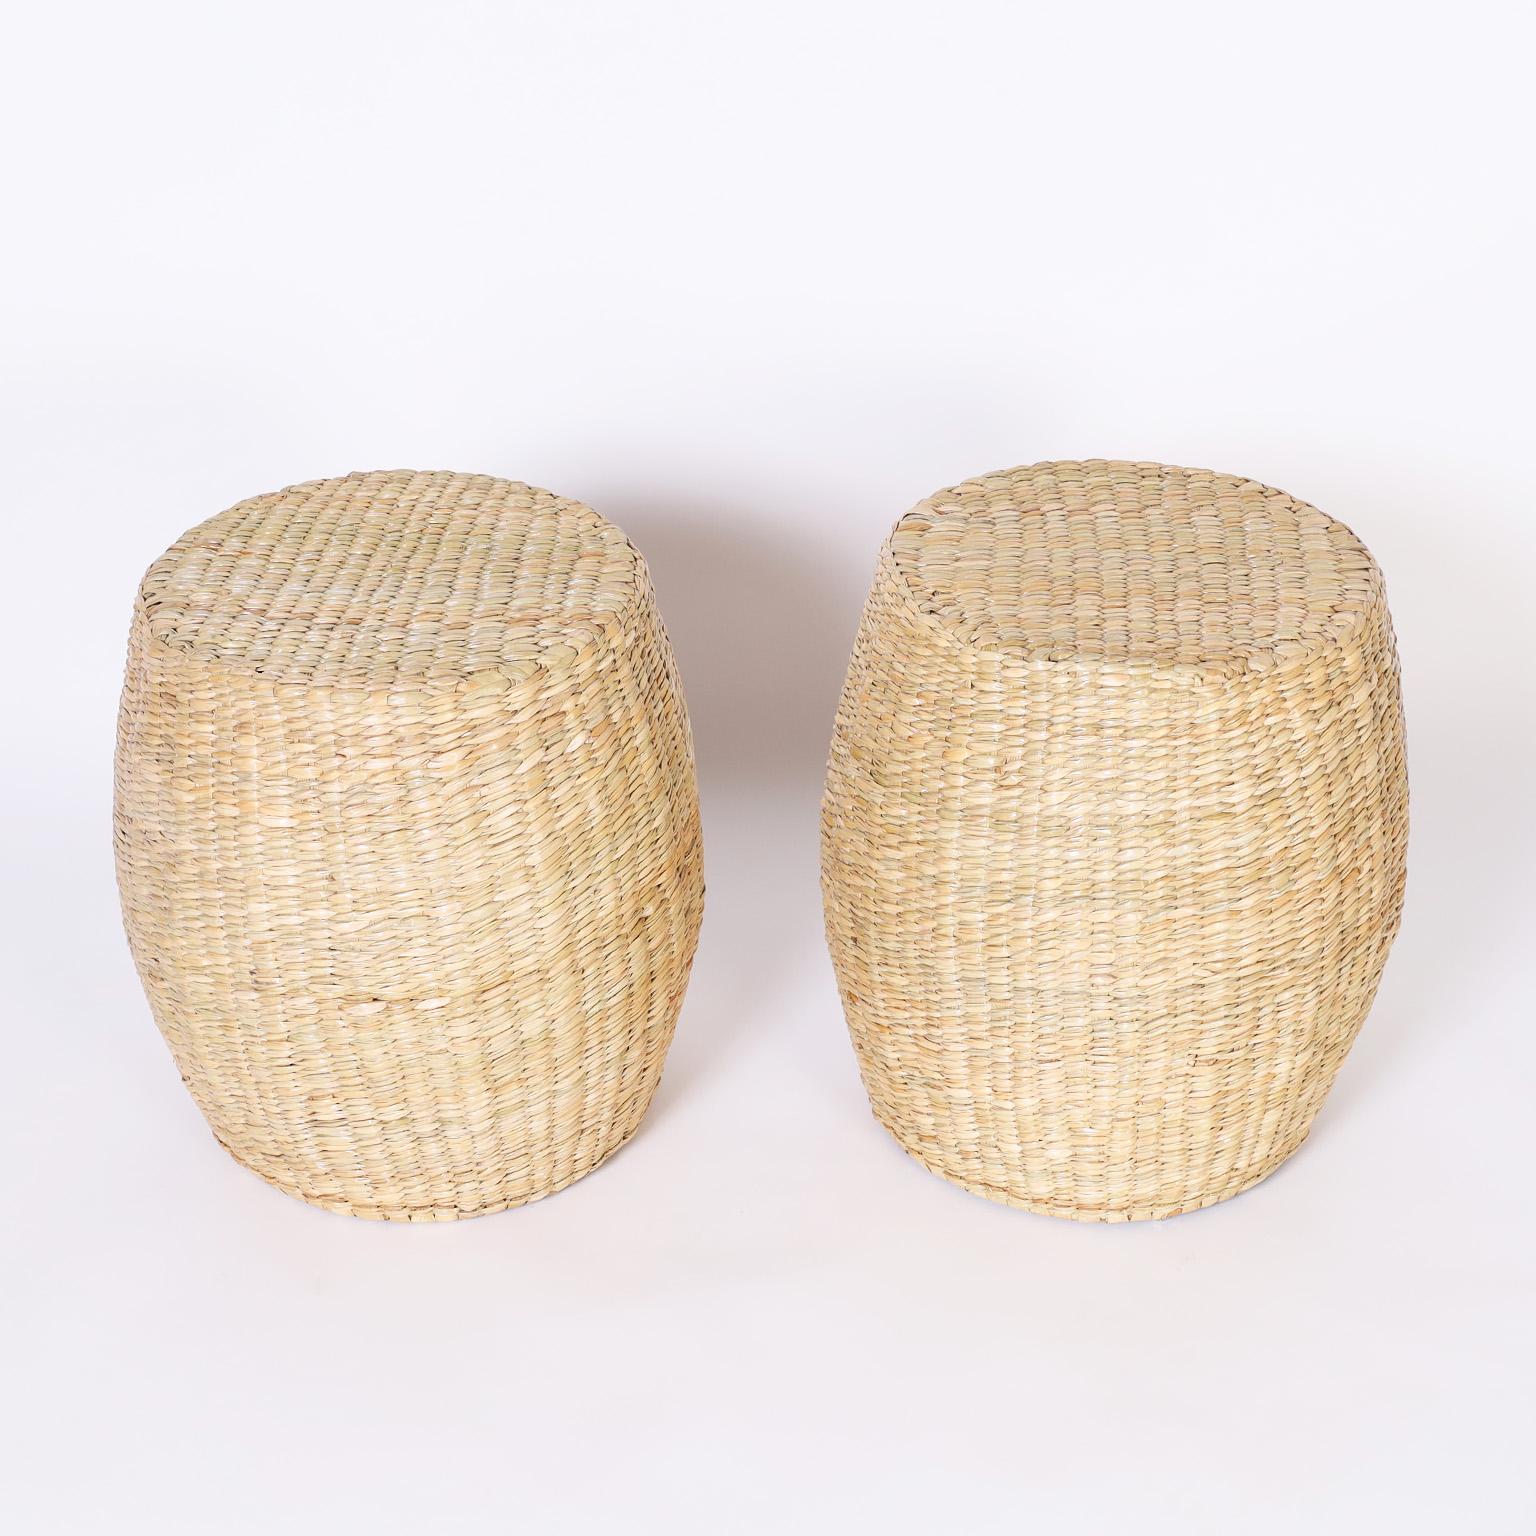 Pair of garden seats or stools crafted in reed expertly wrapped over a sturdy metal frame with the highest quality, exclusively designed and offered by F.S. Henemader antiques as part of the FS Flores Collection.